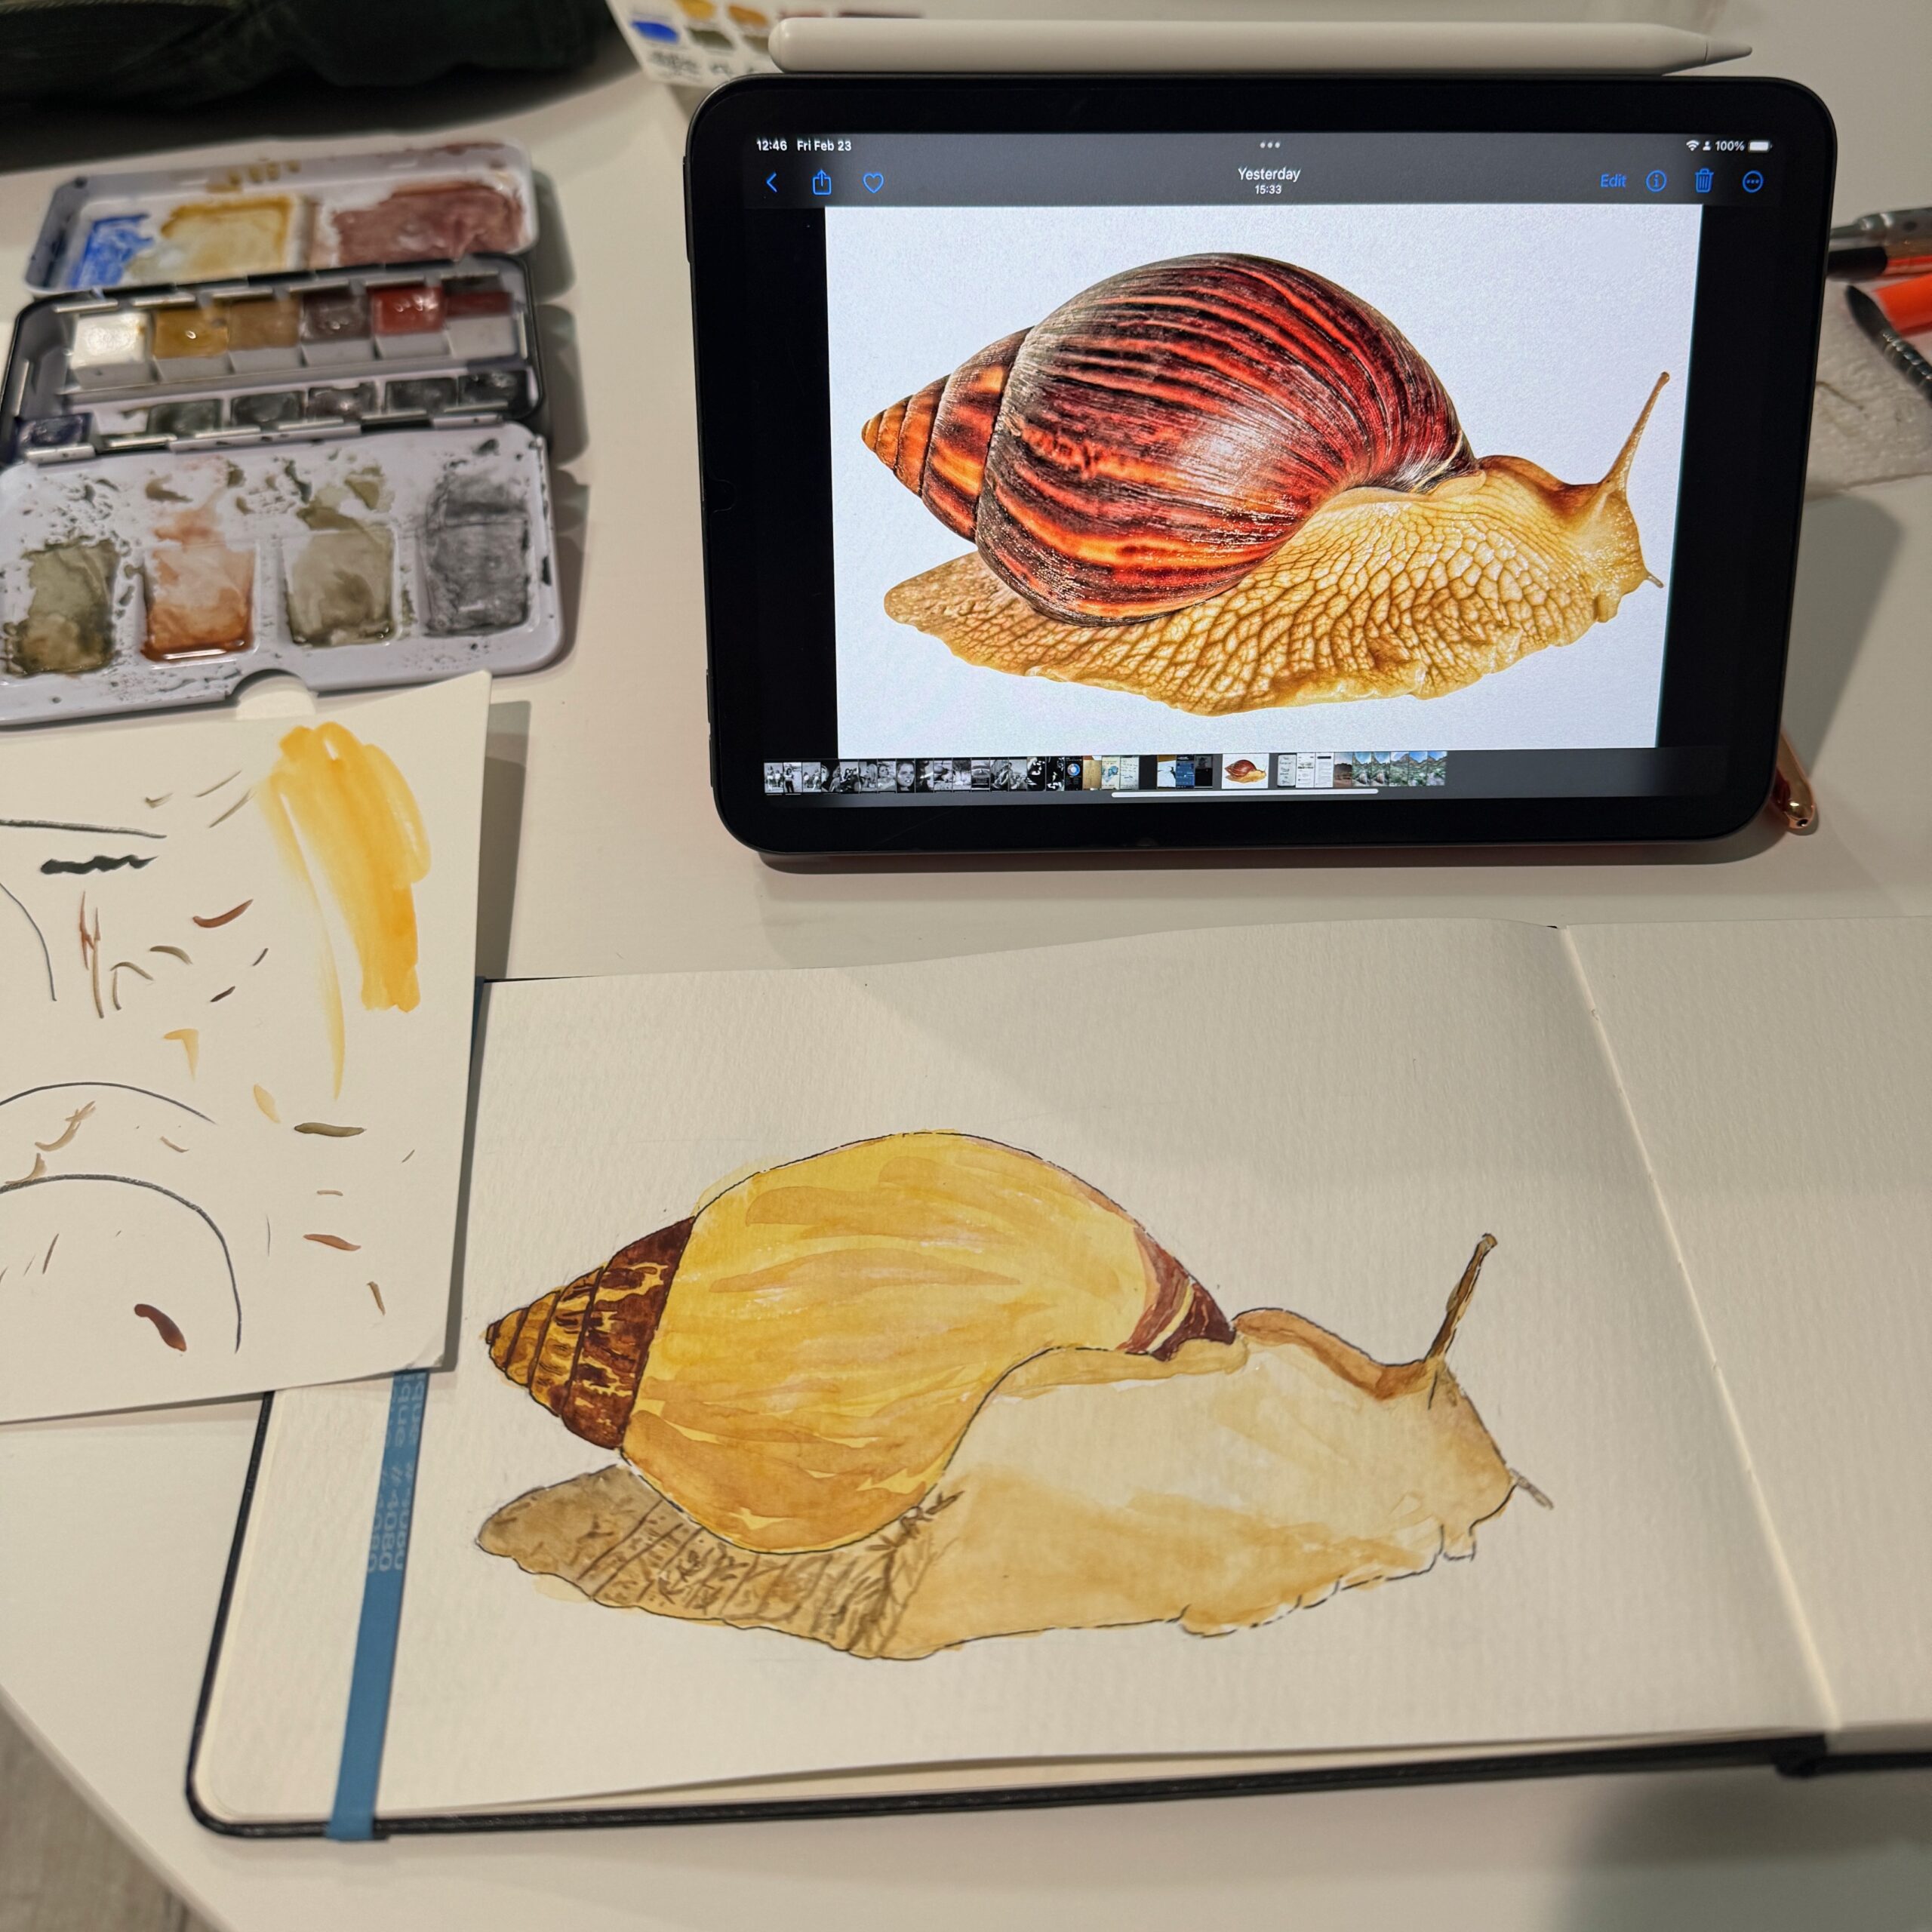 My progress drawing and painting a snail